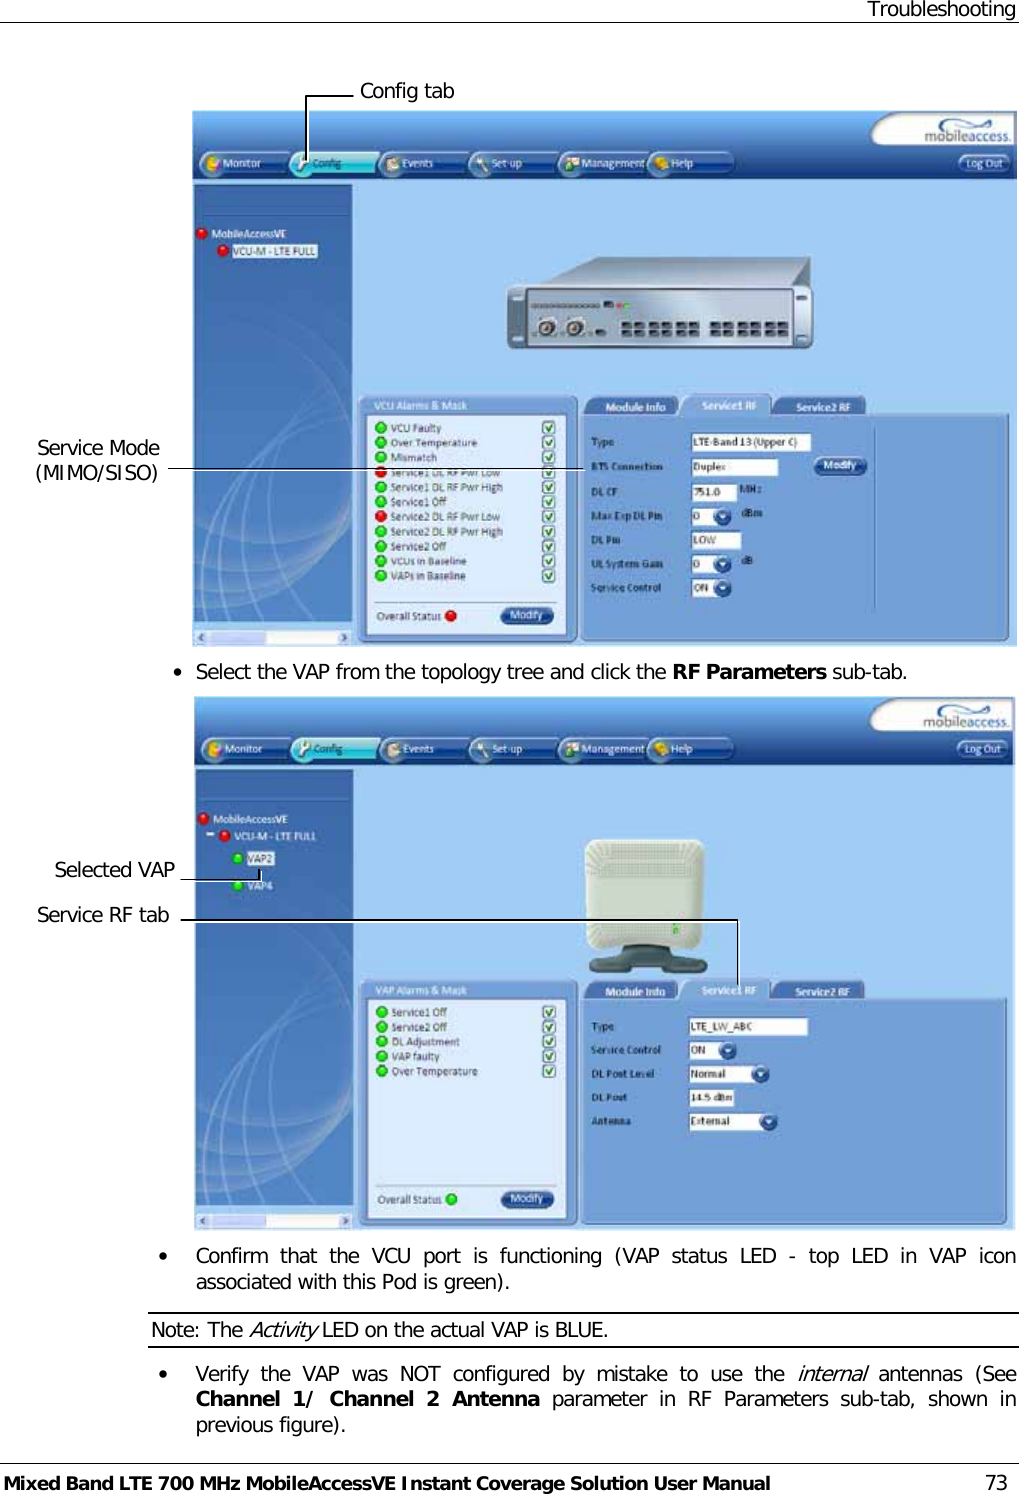 Troubleshooting Mixed Band LTE 700 MHz MobileAccessVE Instant Coverage Solution User Manual  73   • Select the VAP from the topology tree and click the RF Parameters sub-tab.  • Confirm  that the VCU port is functioning (VAP status LED  -  top LED in VAP icon associated with this Pod is green). Note: The Activity LED on the actual VAP is BLUE. • Verify the VAP was NOT  configured  by mistake to use the internal antennas  (See Channel 1/ Channel 2 Antenna parameter in RF Parameters sub-tab, shown in previous figure).  Selected VAP Config tab Service Mode (MIMO/SISO) Service RF tab 